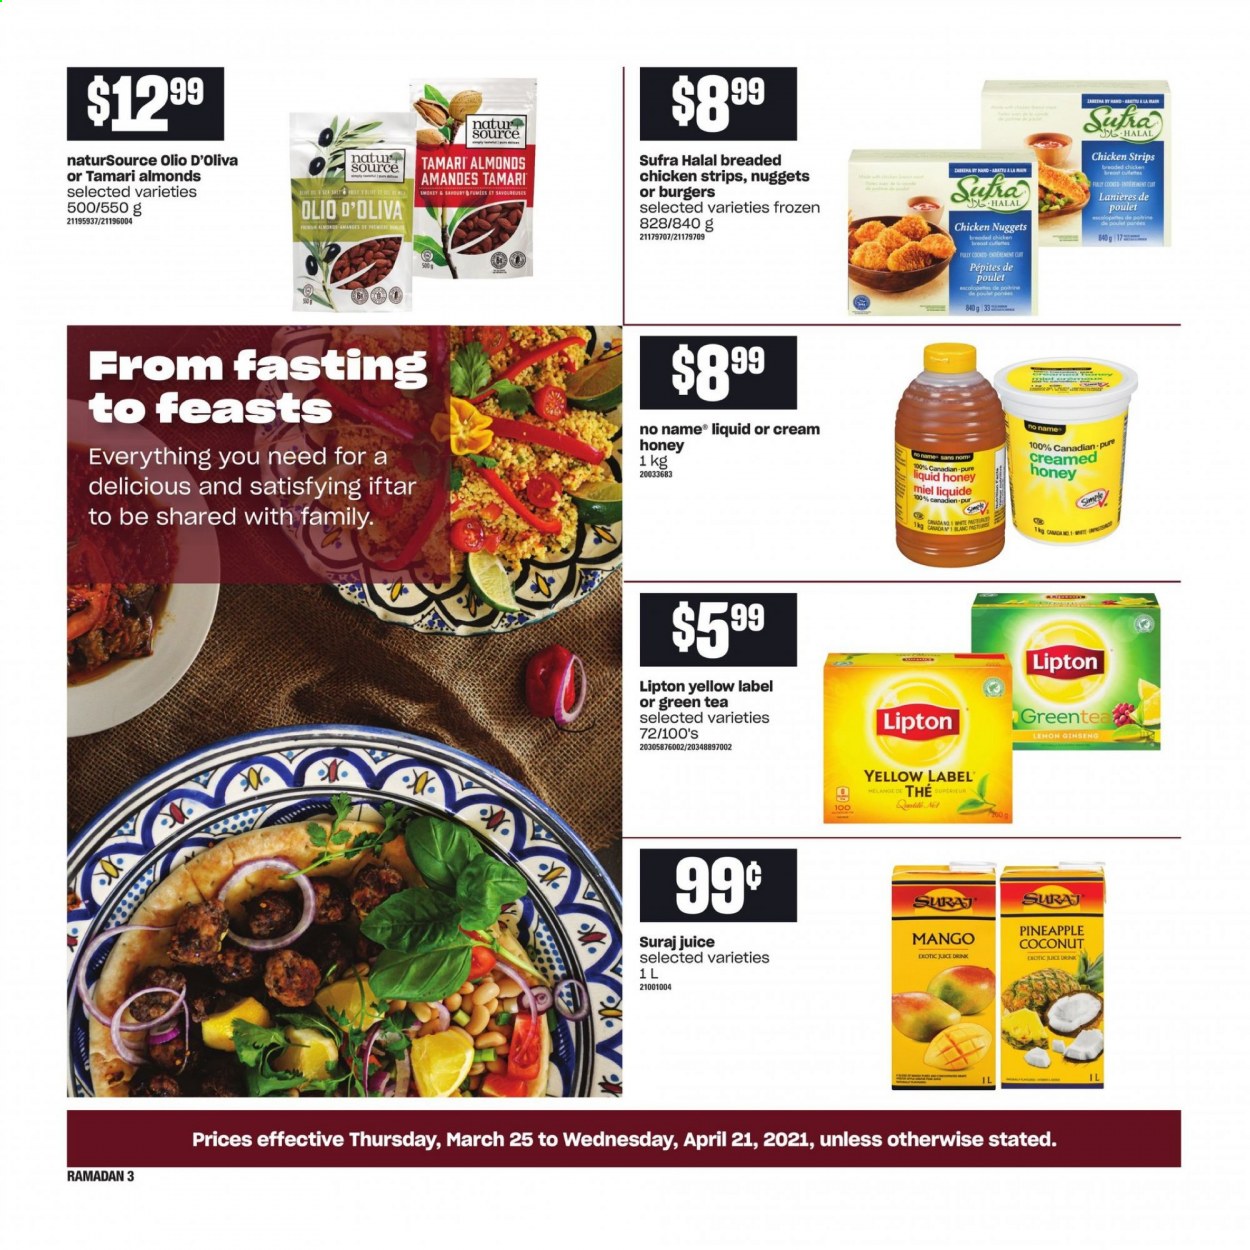 thumbnail - Atlantic Superstore Flyer - March 25, 2021 - April 21, 2021 - Sales products - mango, pineapple, coconut, No Name, nuggets, fried chicken, chicken nuggets, strips, chicken strips, honey, almonds, juice, green tea, chicken, ginseng. Page 3.